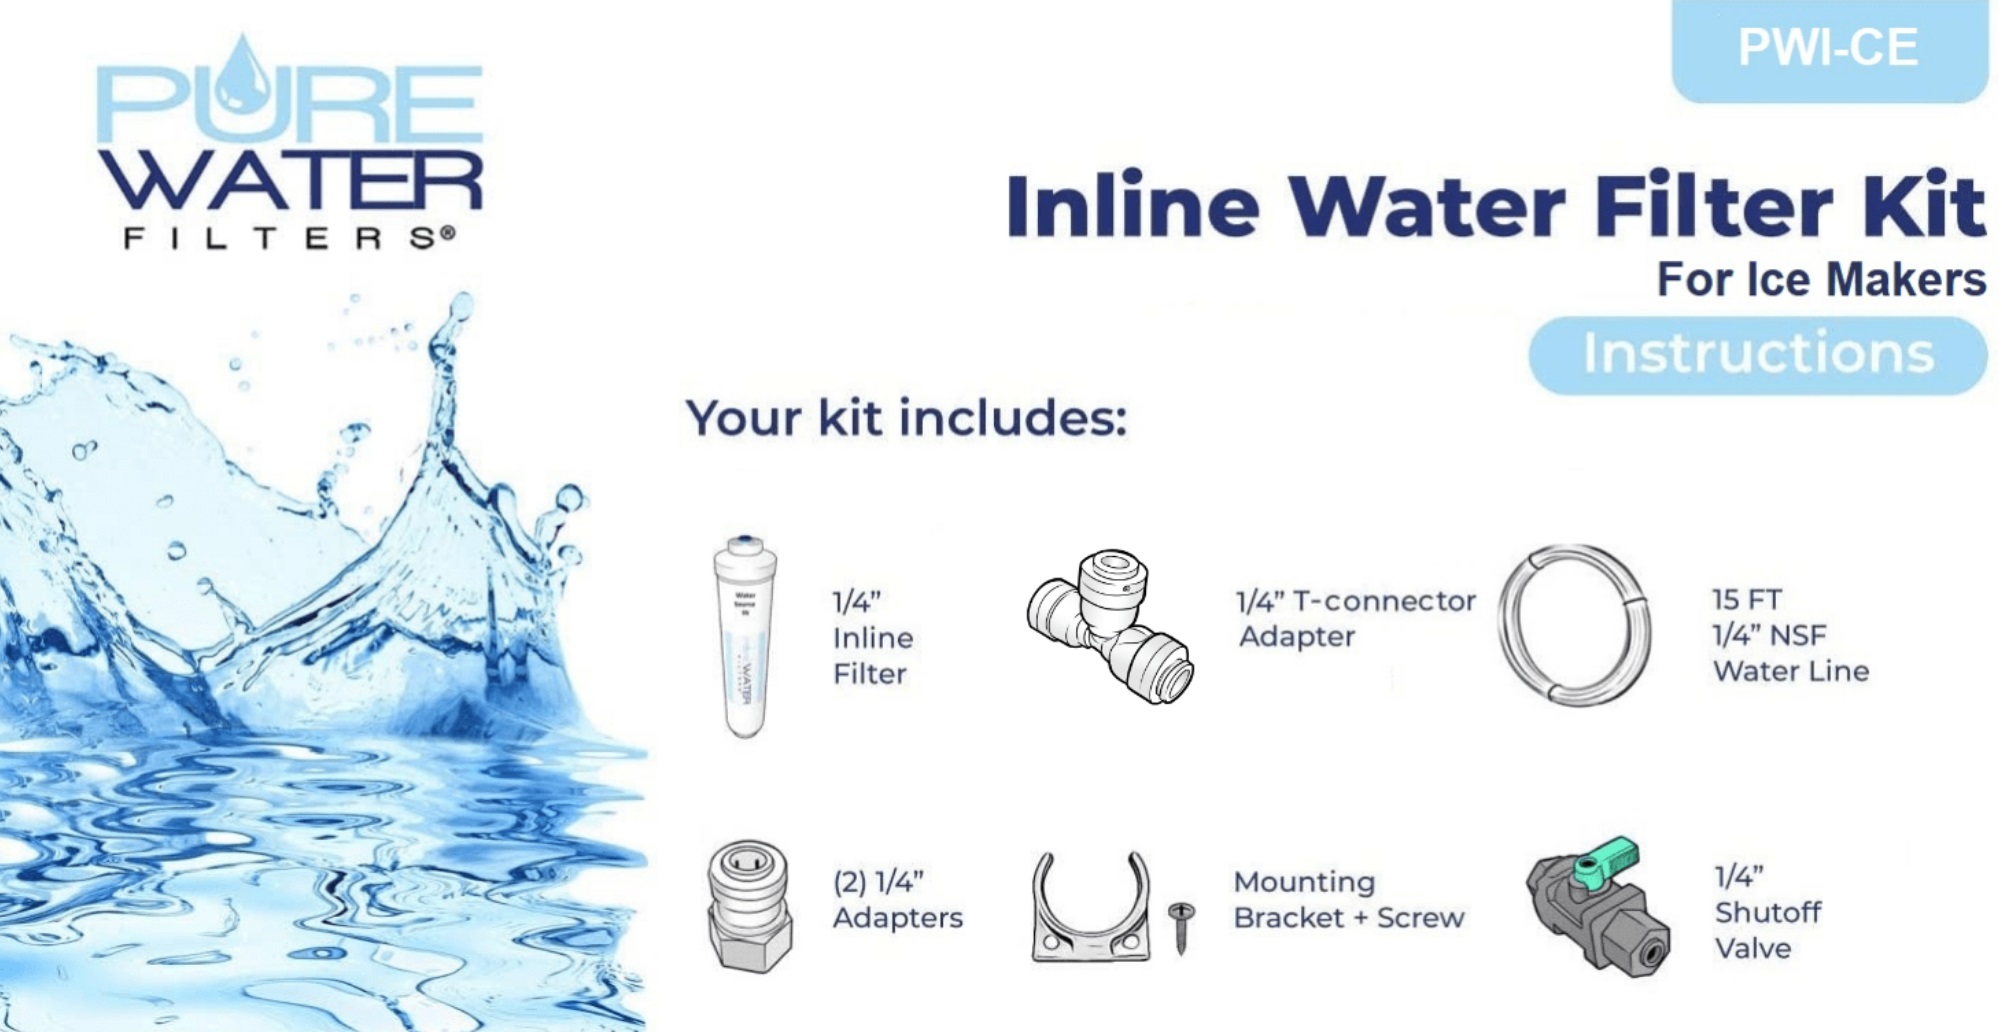 Inline Water Filter Kit for Ice Makers with 1/4" Tubing and a T-Connector - image 4 of 11